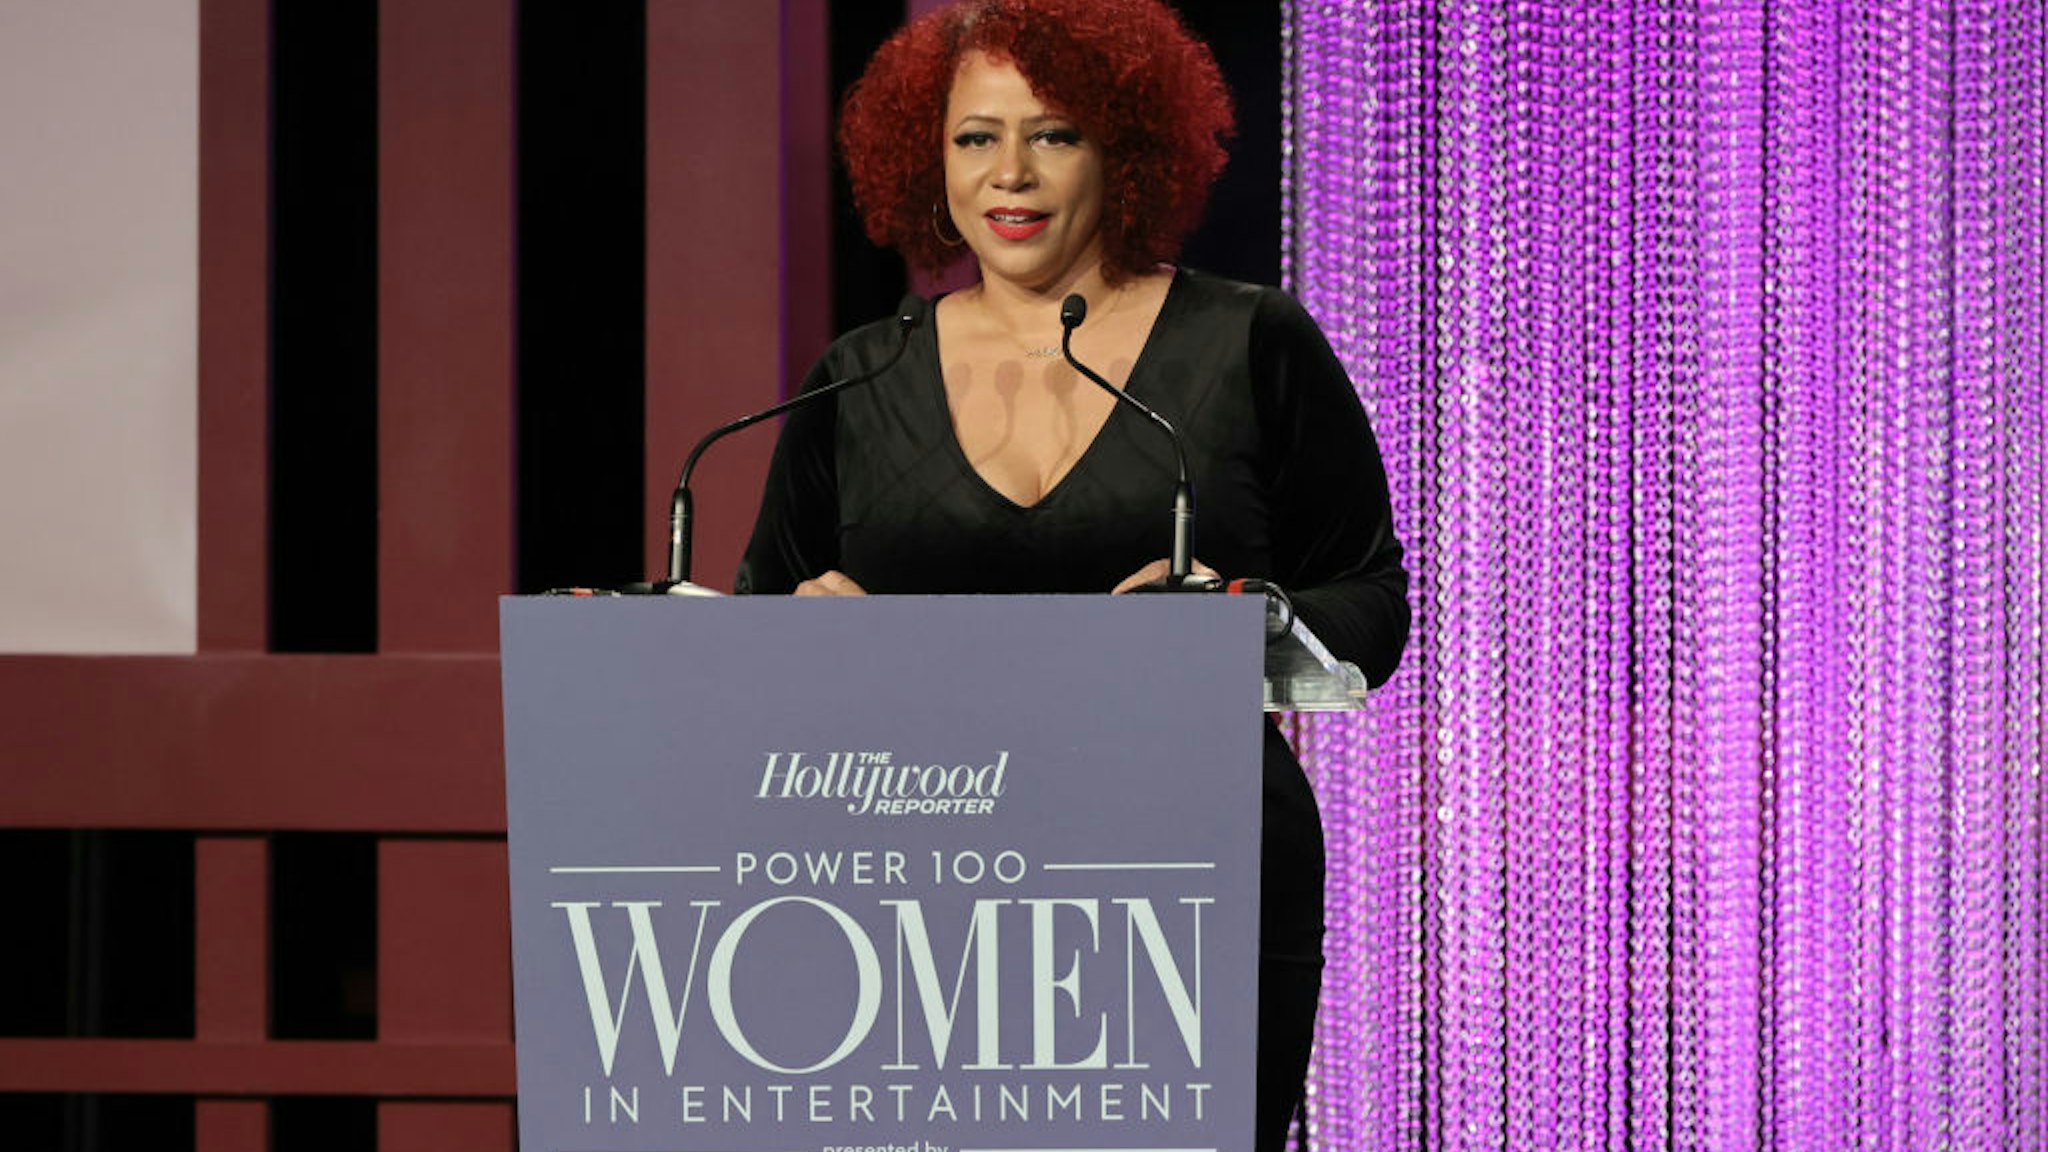 LOS ANGELES, CALIFORNIA - DECEMBER 08: Nikole Hannah-Jones speaks onstage at The Hollywood Reporter 2021 Power 100 Women in Entertainment, presented by Lifetime at Fairmont Century Plaza on December 08, 2021 in Los Angeles, California.